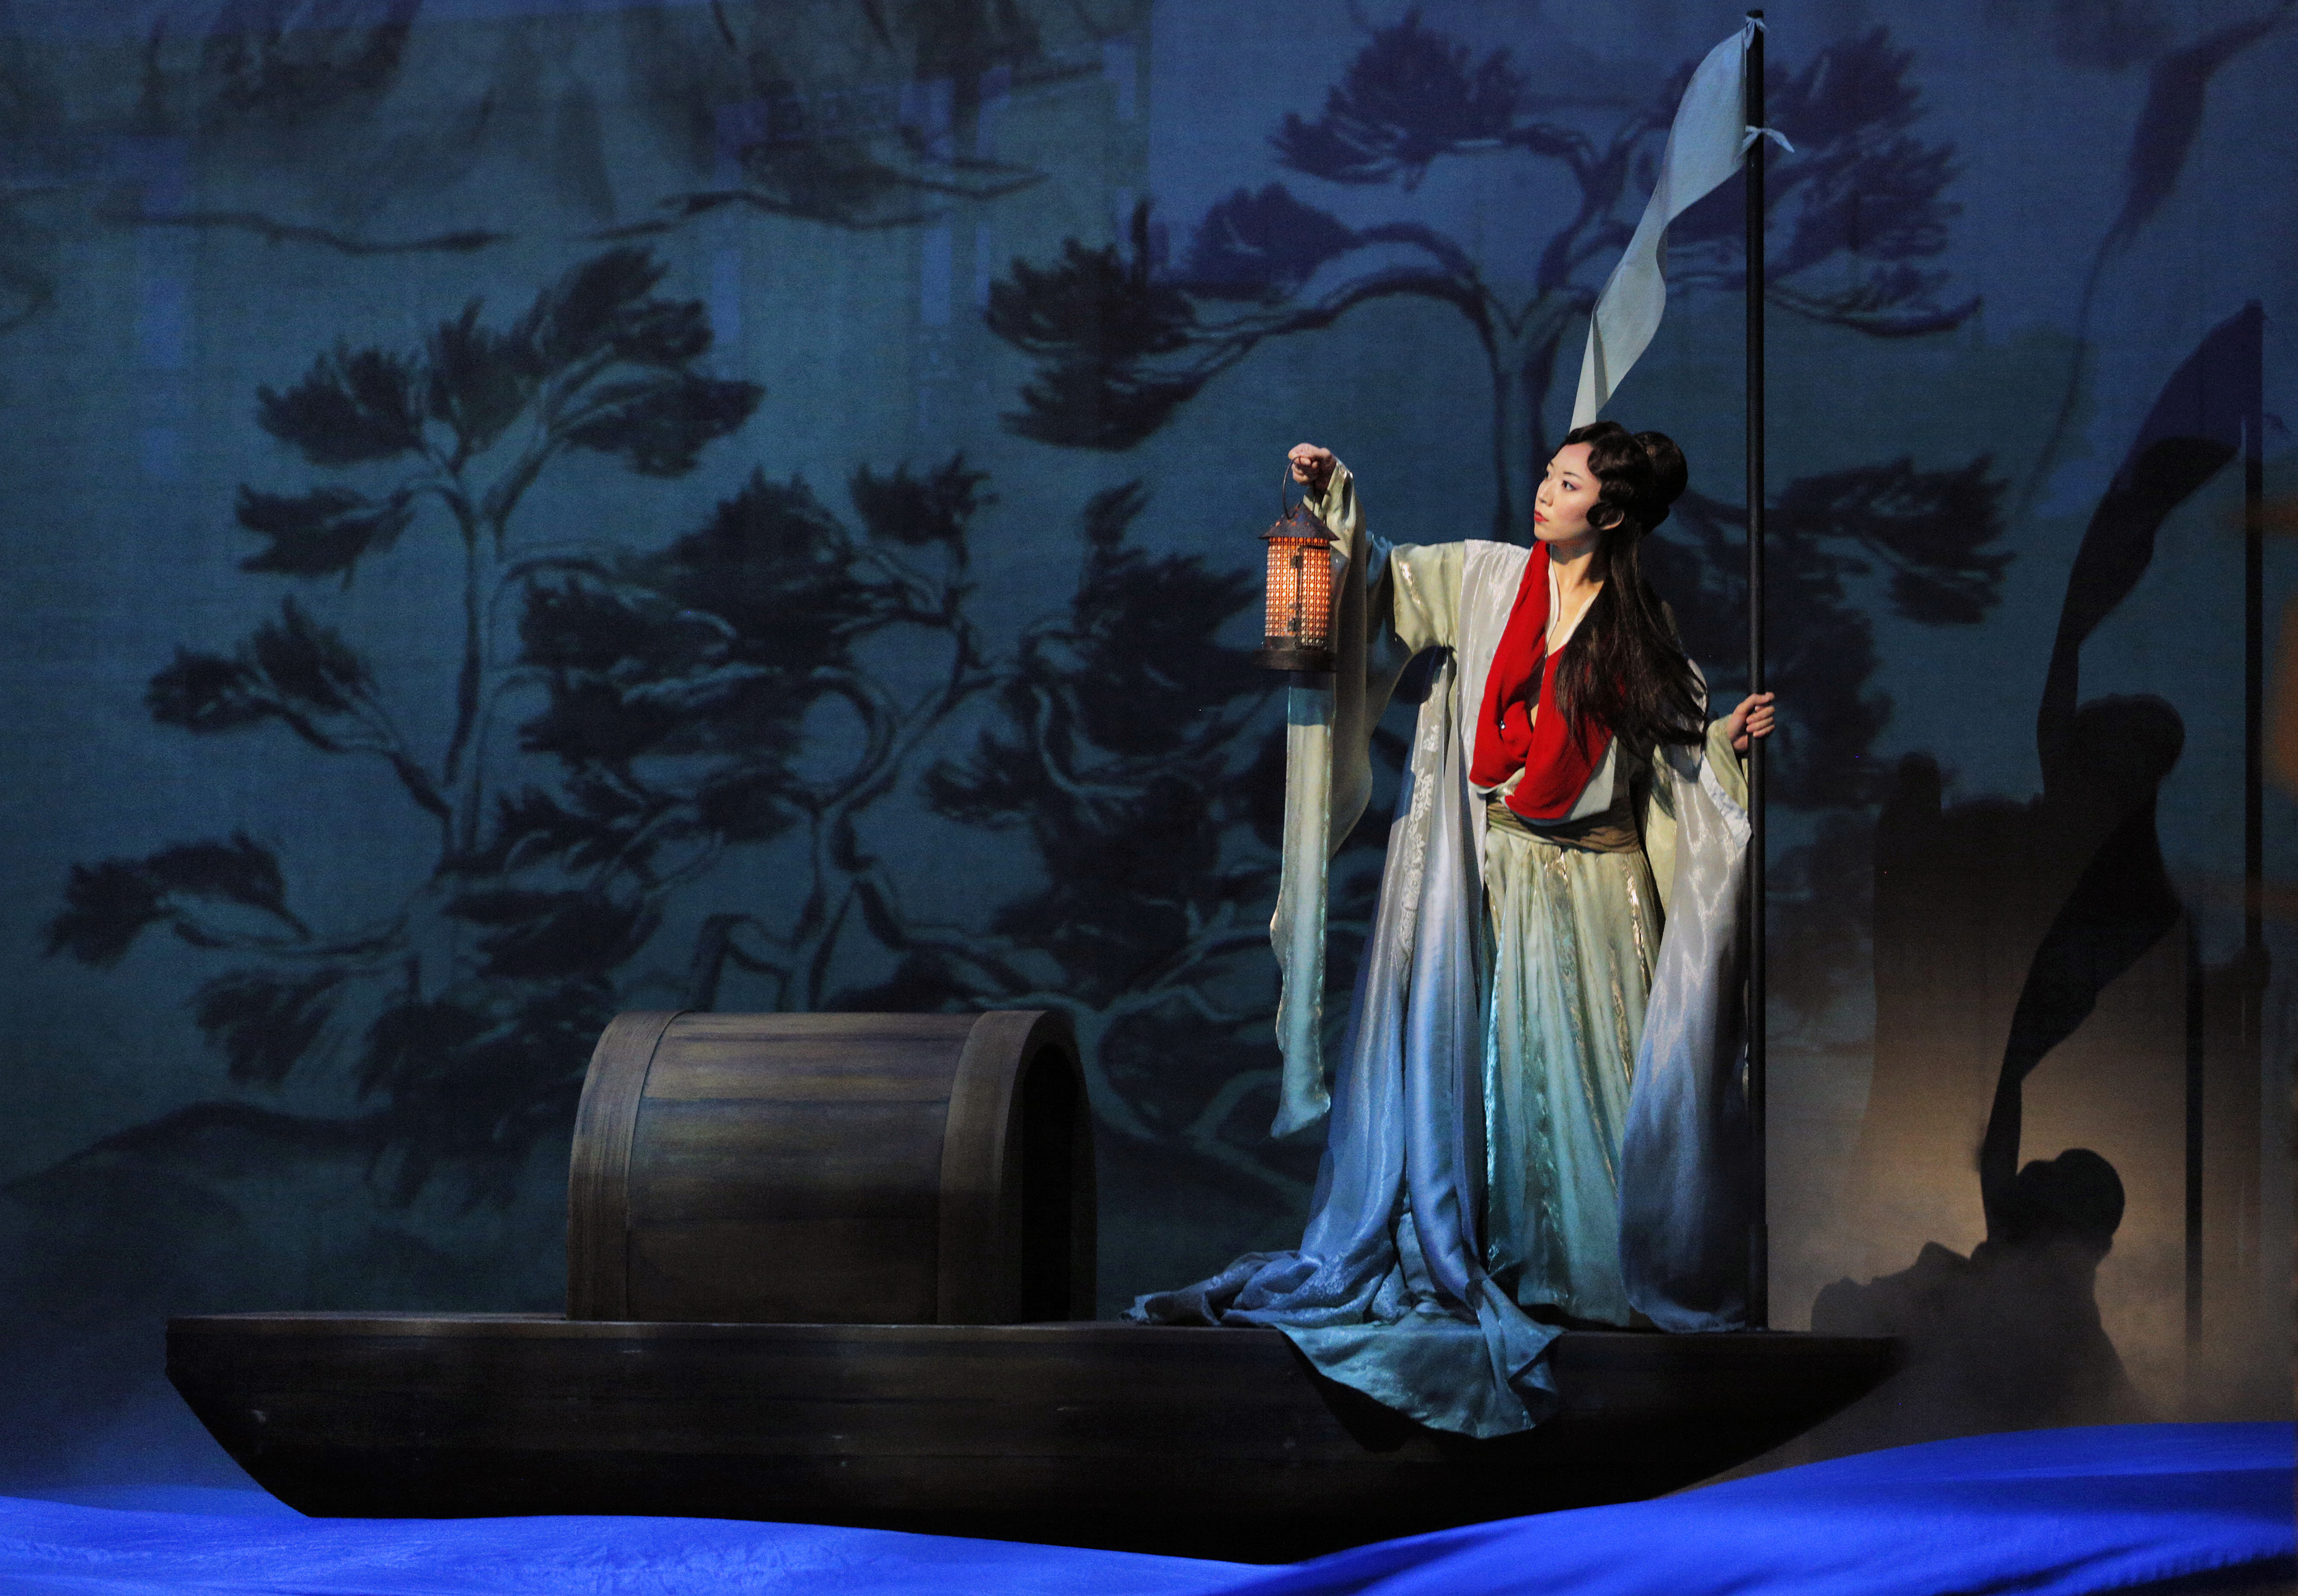 A woman in traditional East Asian attire holds a lantern while standing on a wooden boat with a blue-and-green painted backdrop of trees and mist.